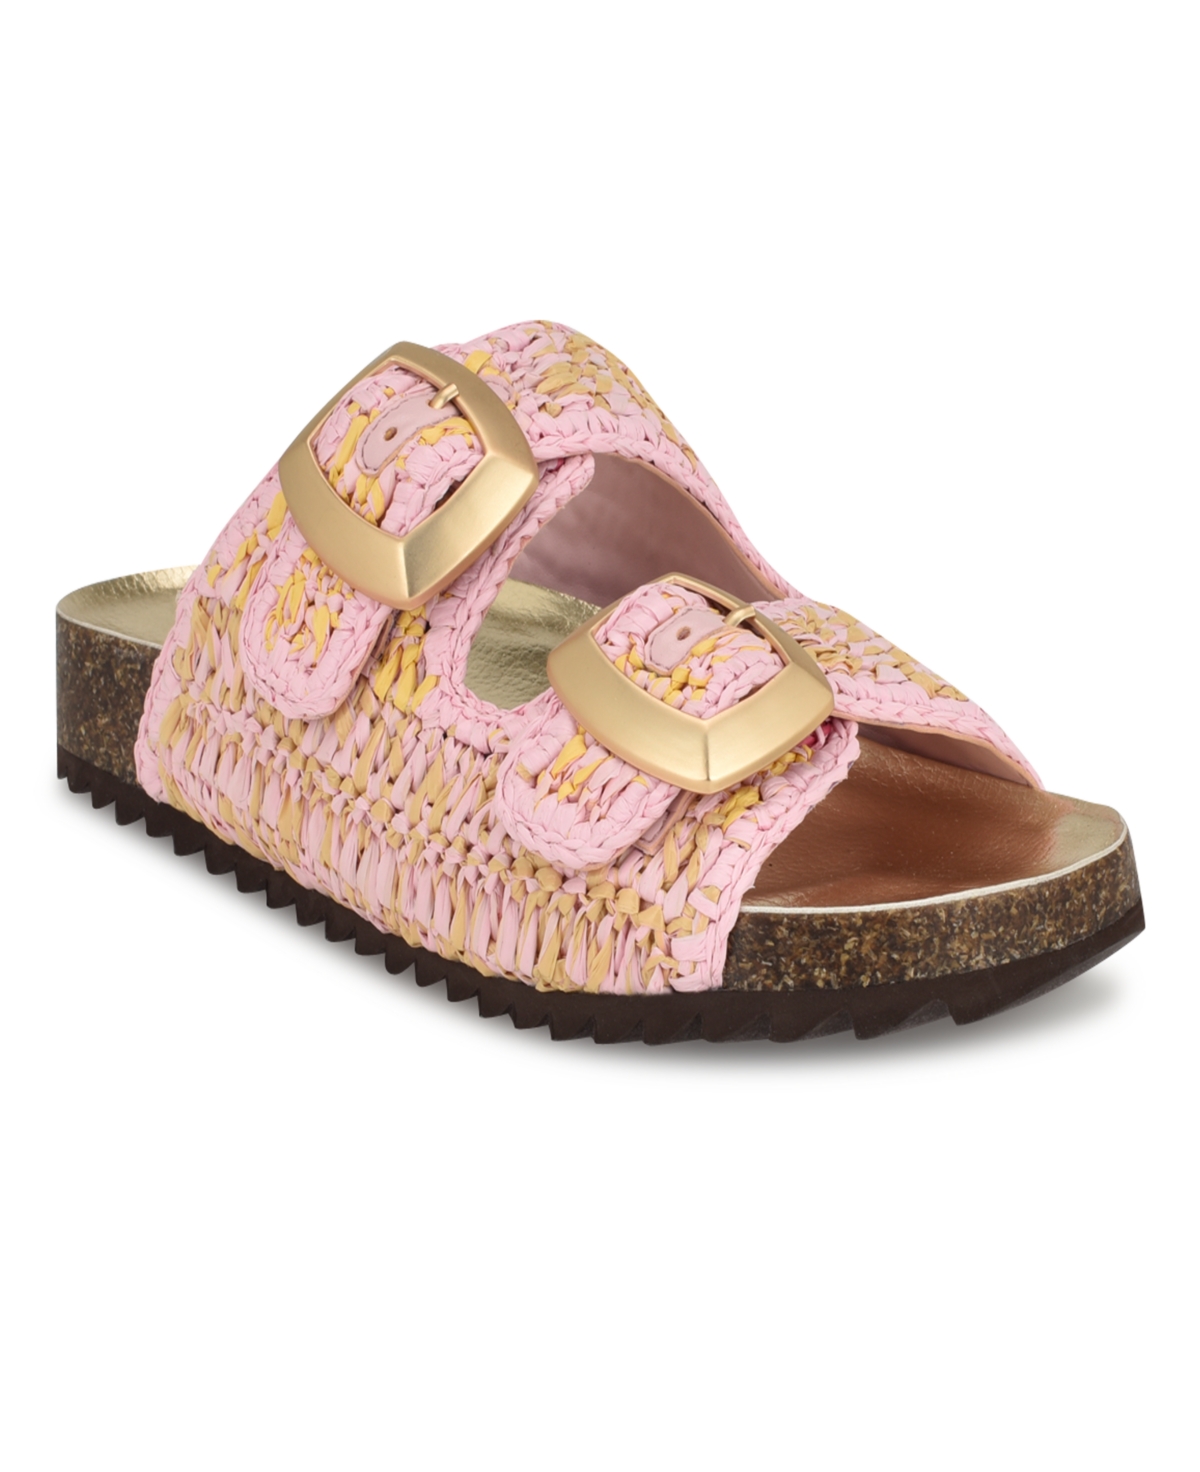 Women's Tenly Round Toe Slip-On Casual Sandals - Pink Multi